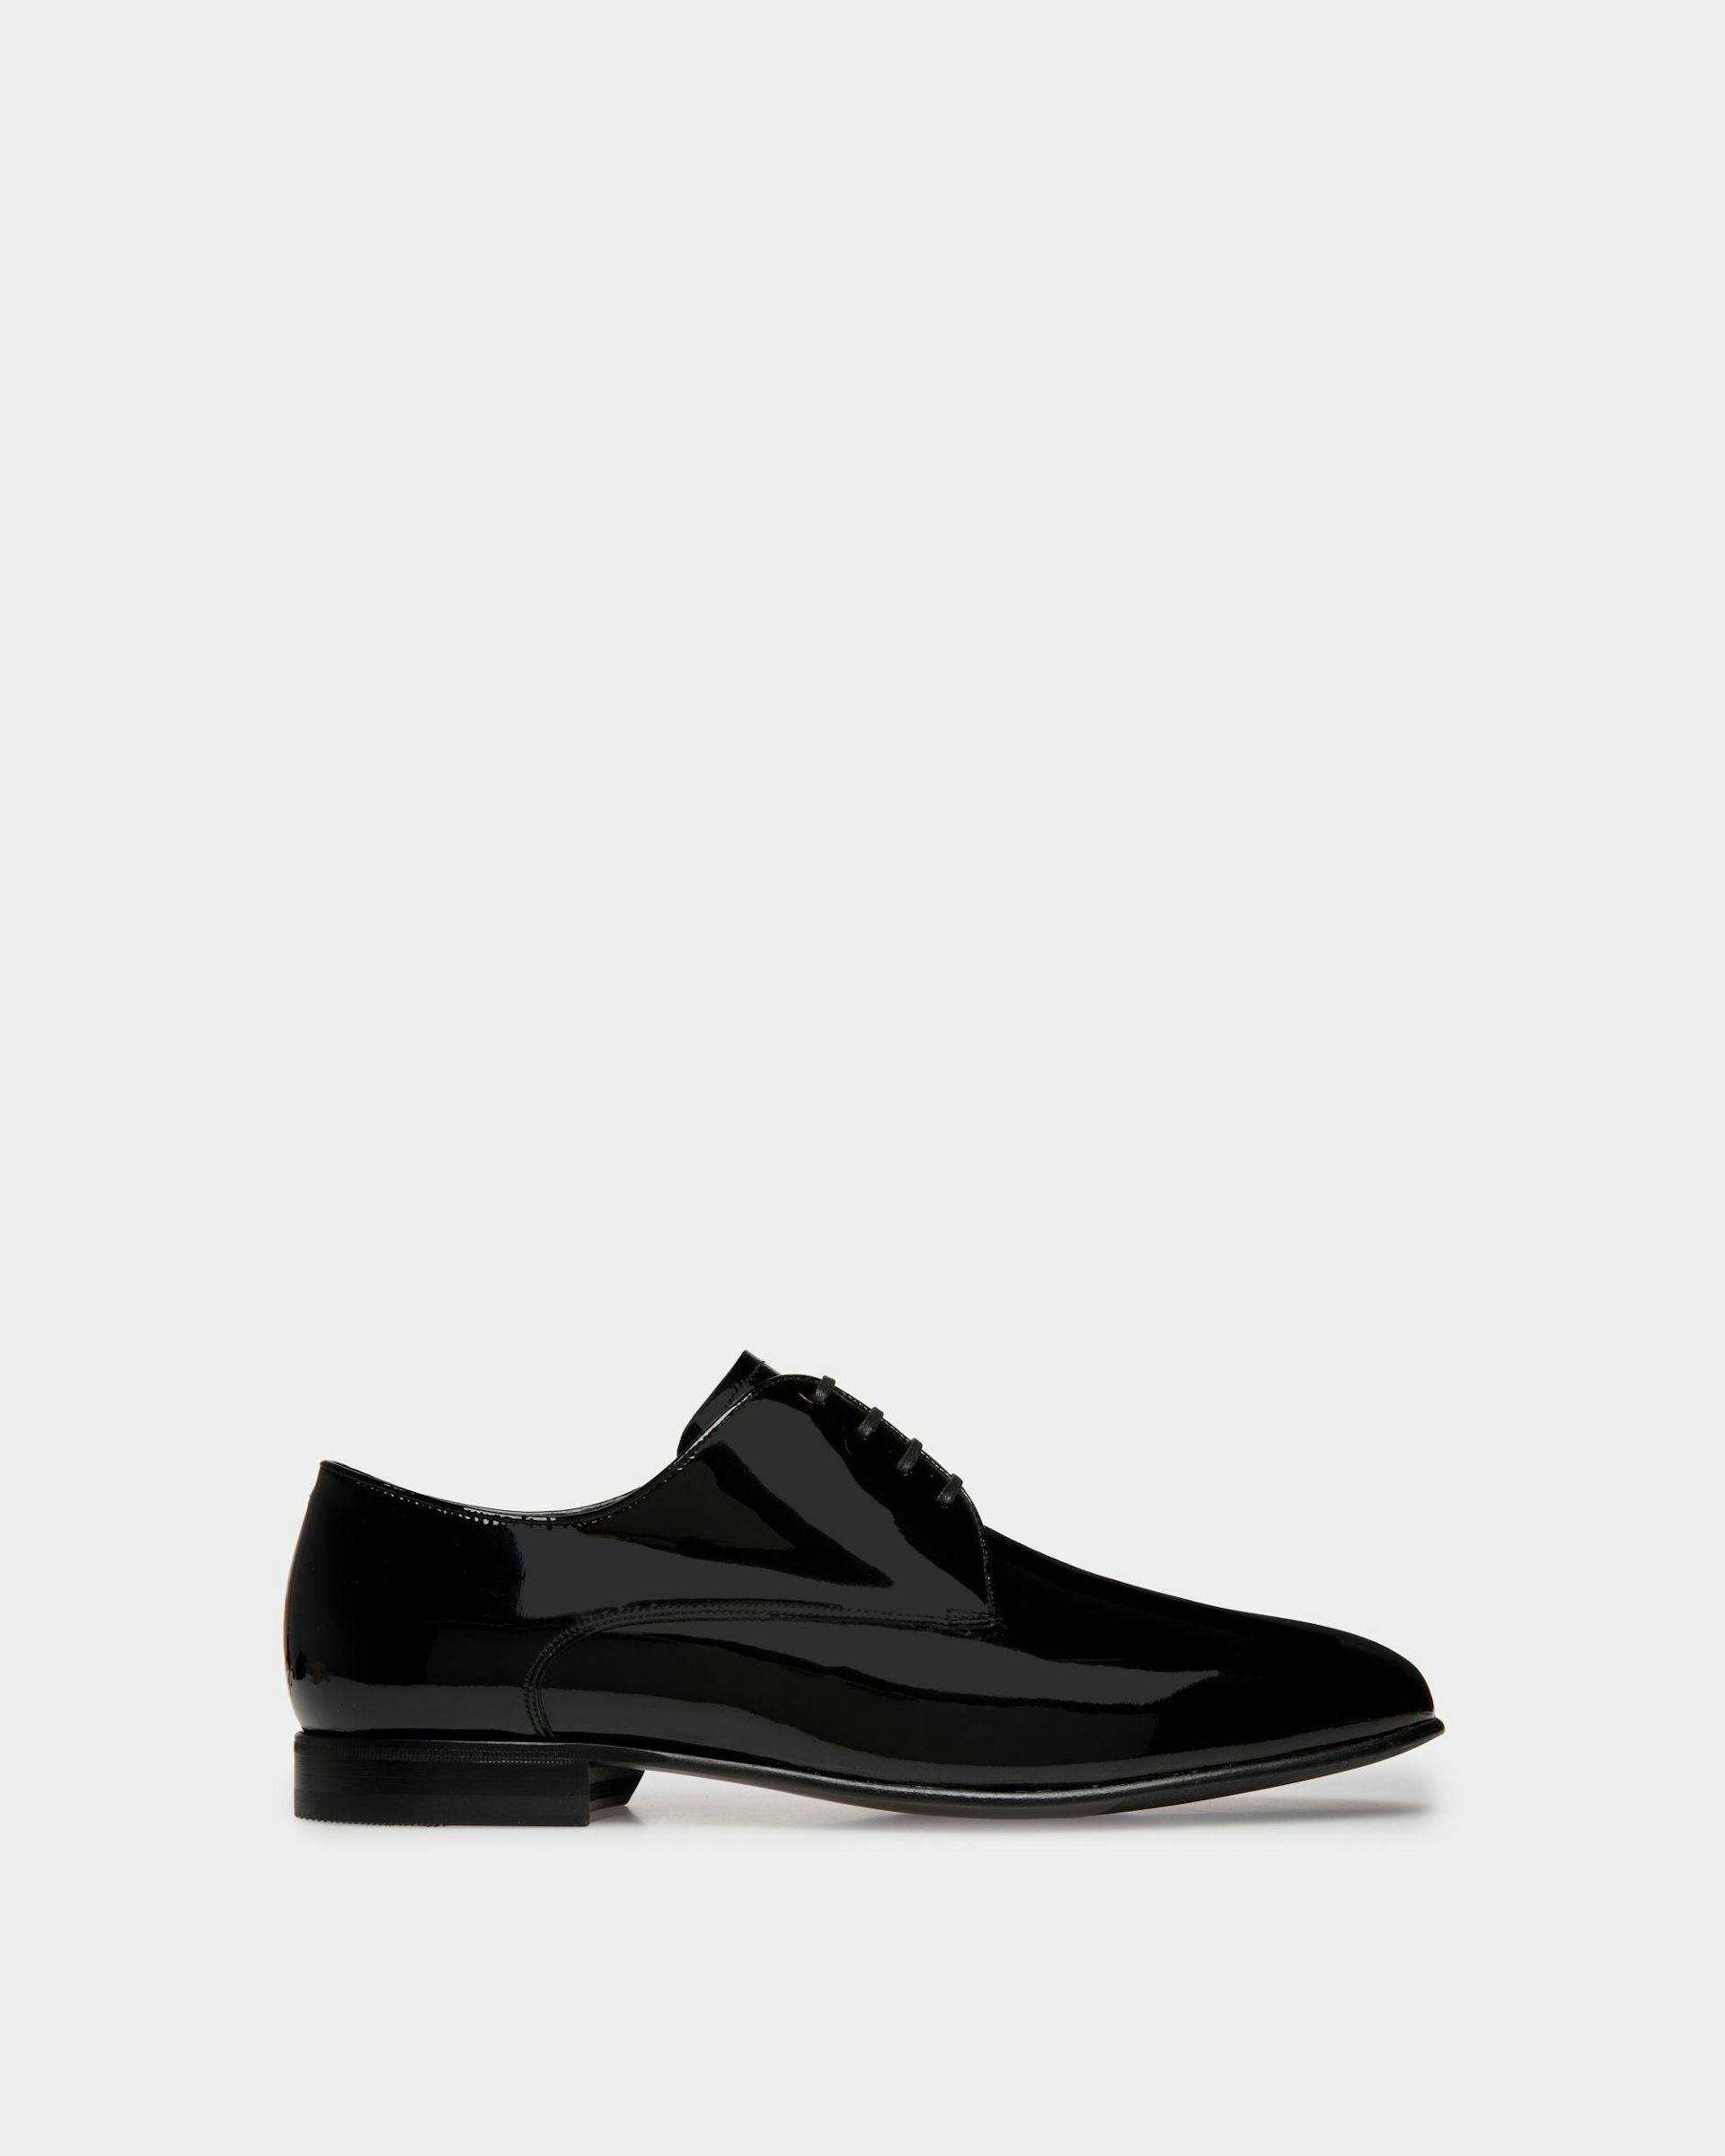 Suisse Derby in Black Patent Leather - Bally